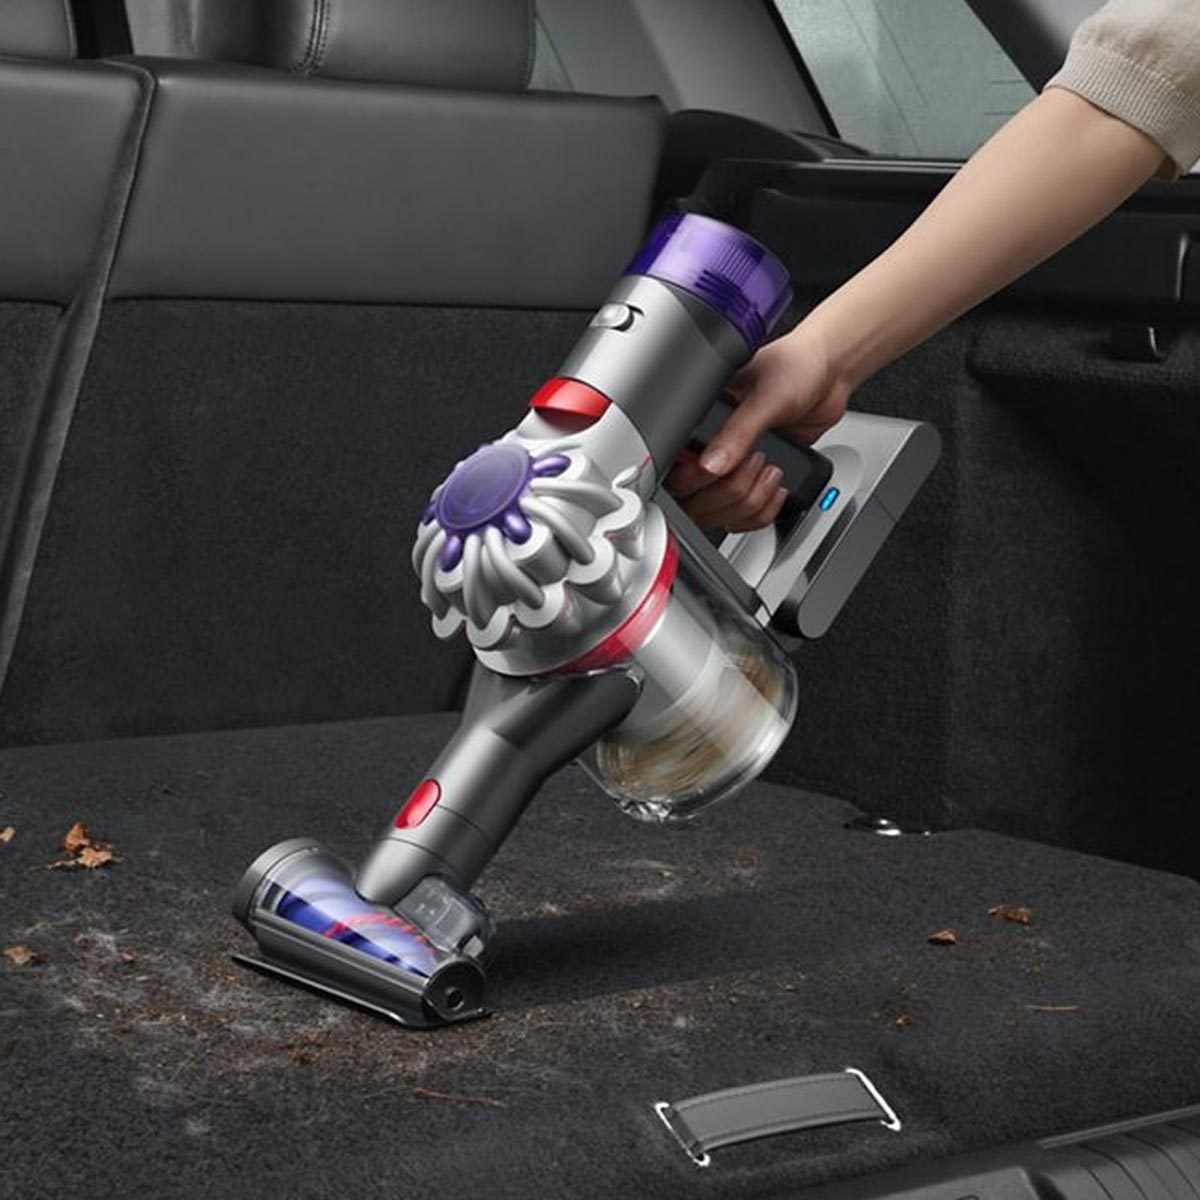 6 Best Stick Vacuums for Easy Corded and Cordless Cleanings